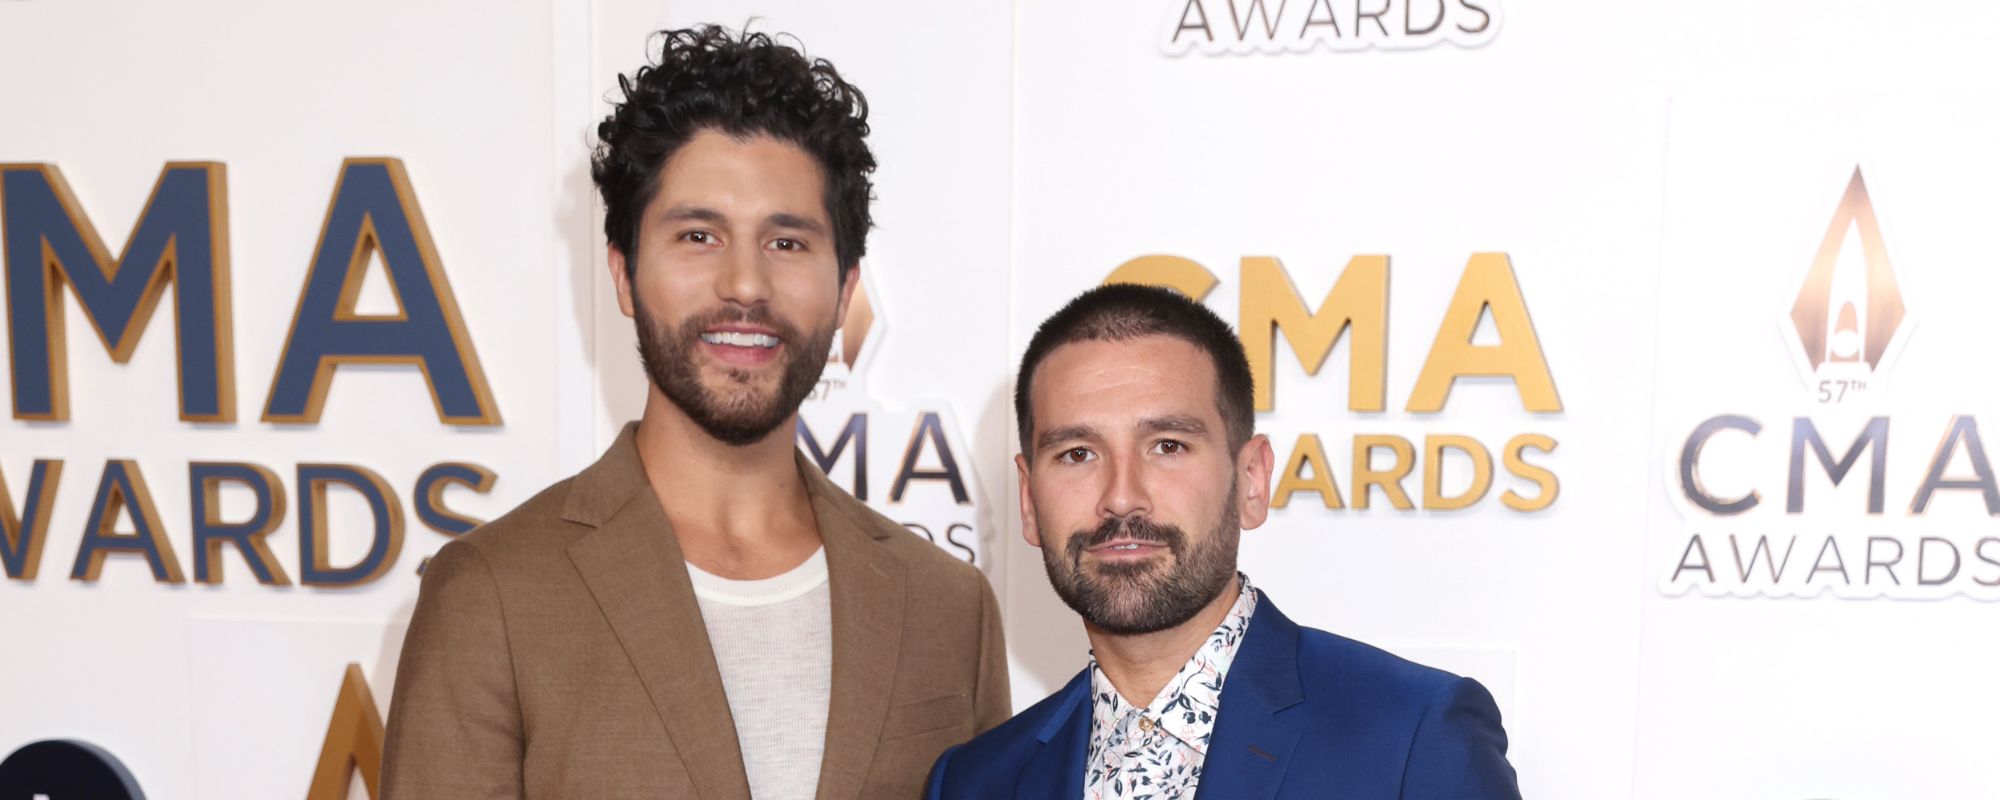 Dan + Shay Have “No Wisdom” for Their Successors in Wake of Their Exit From ‘The Voice’